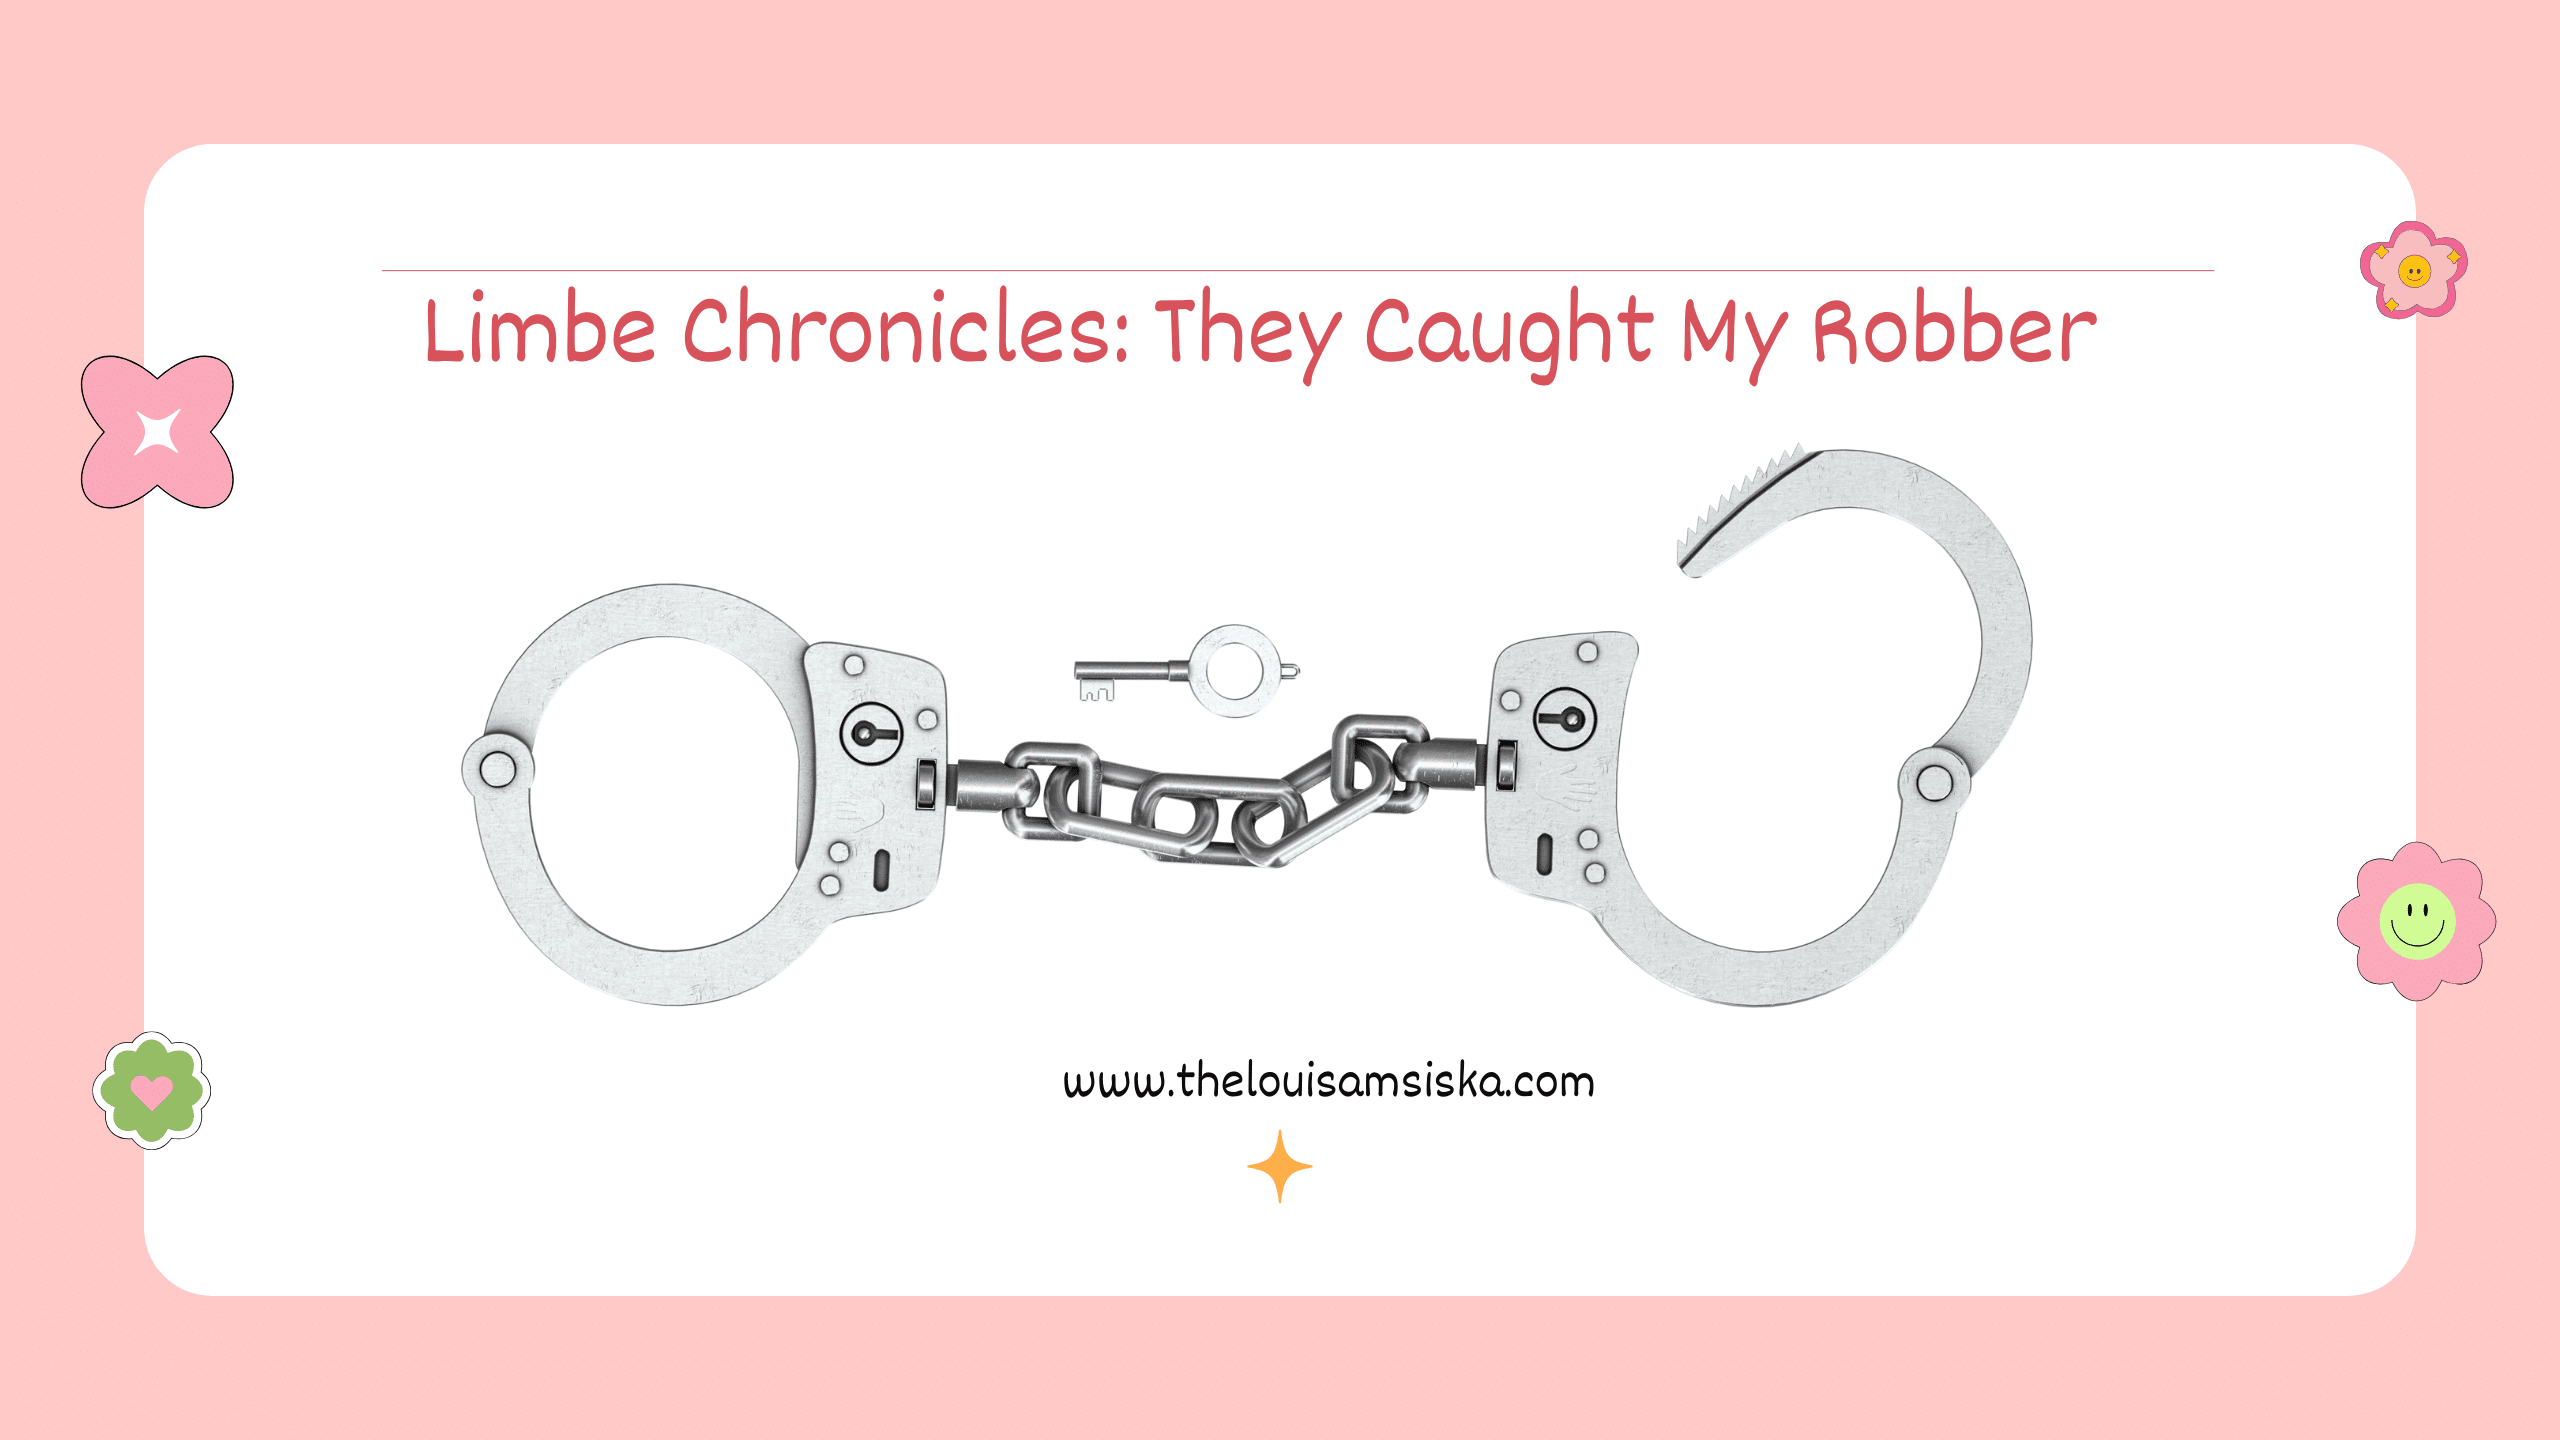 Limbe Chronicles: They Caught My Robber